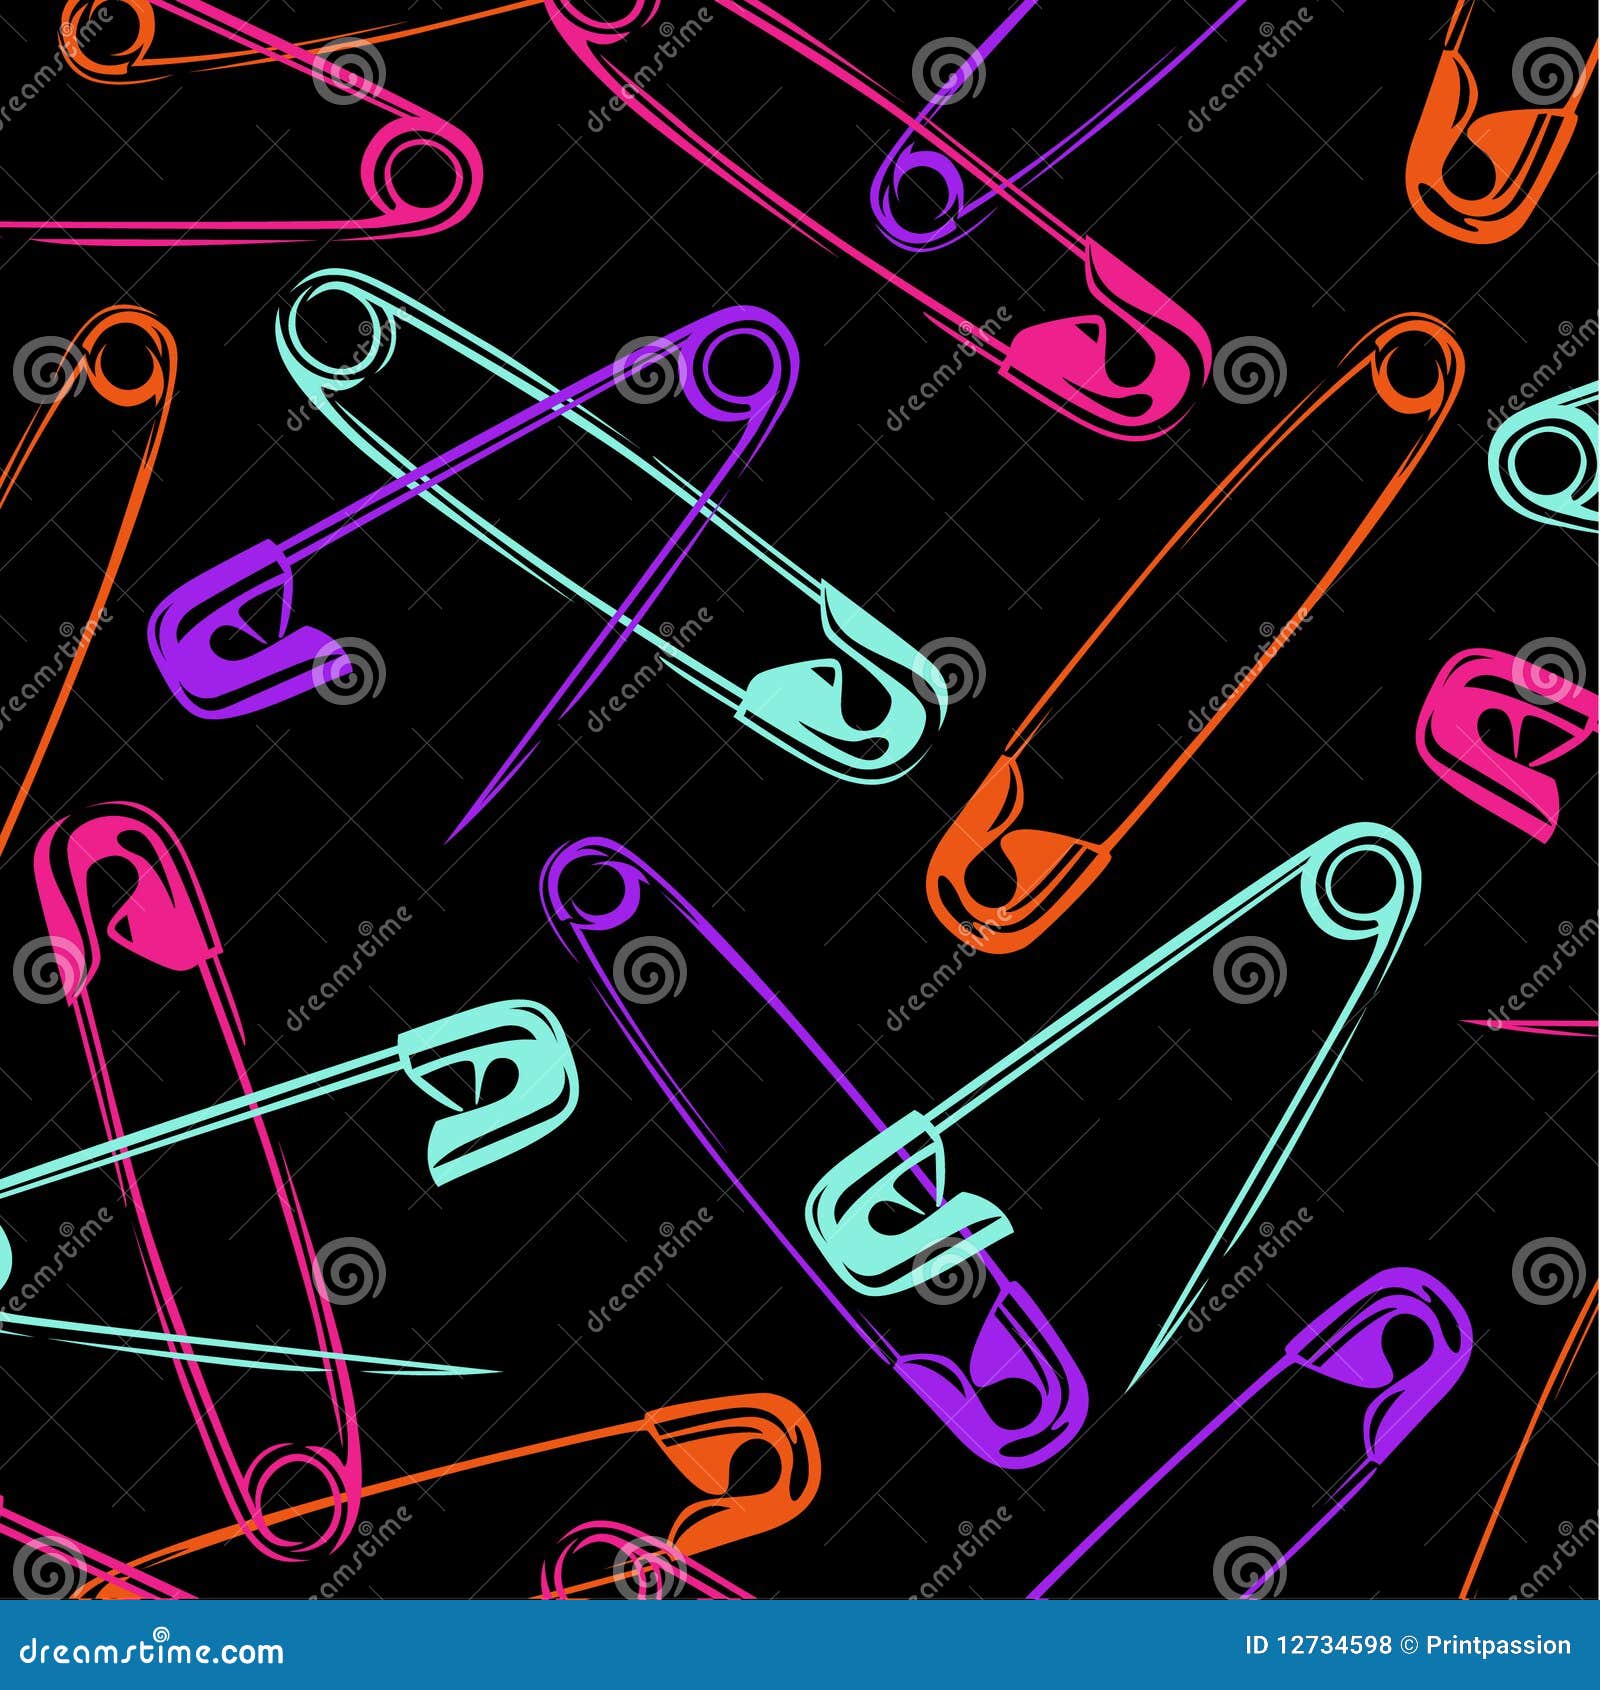 Colored Safety Pins Stock Illustration - Download Image Now